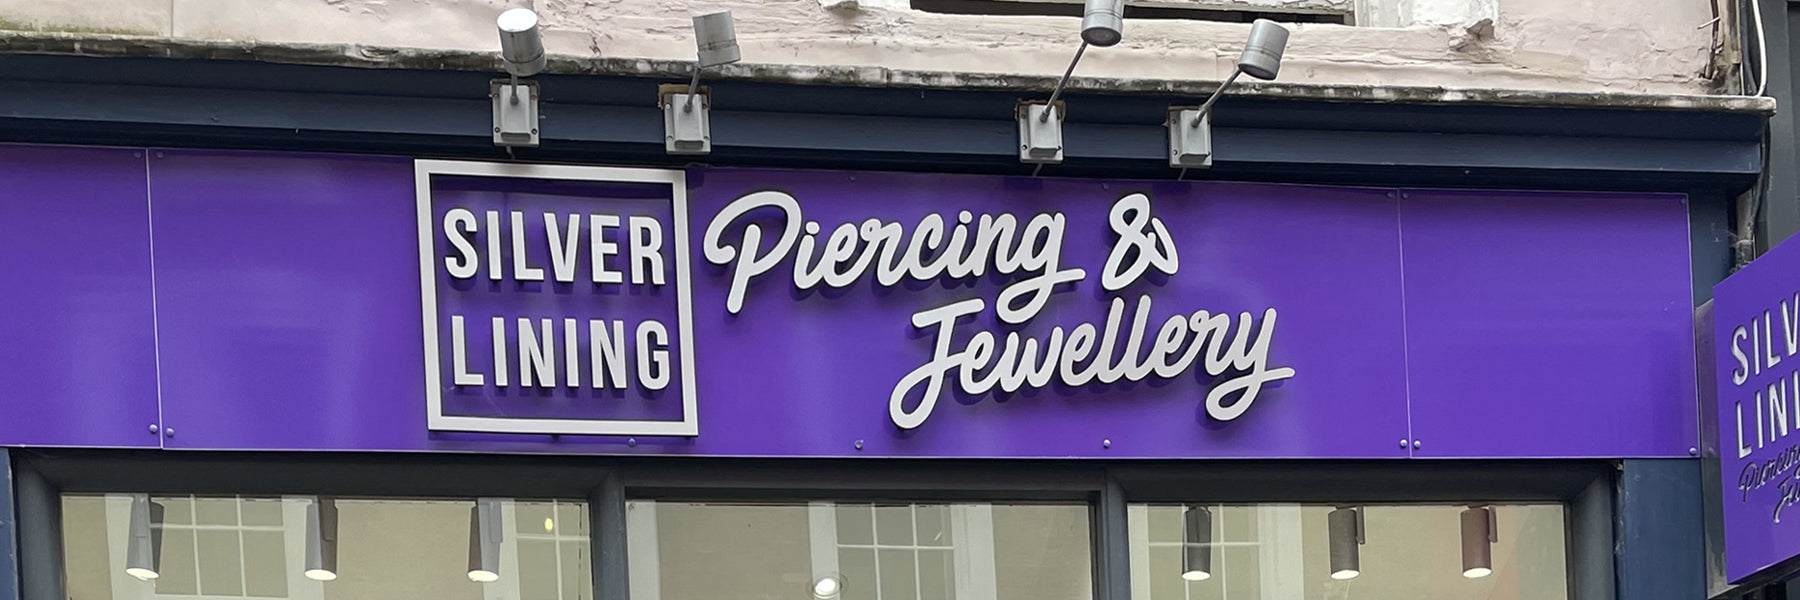 Silver Lining modern body piercing specialists storefront